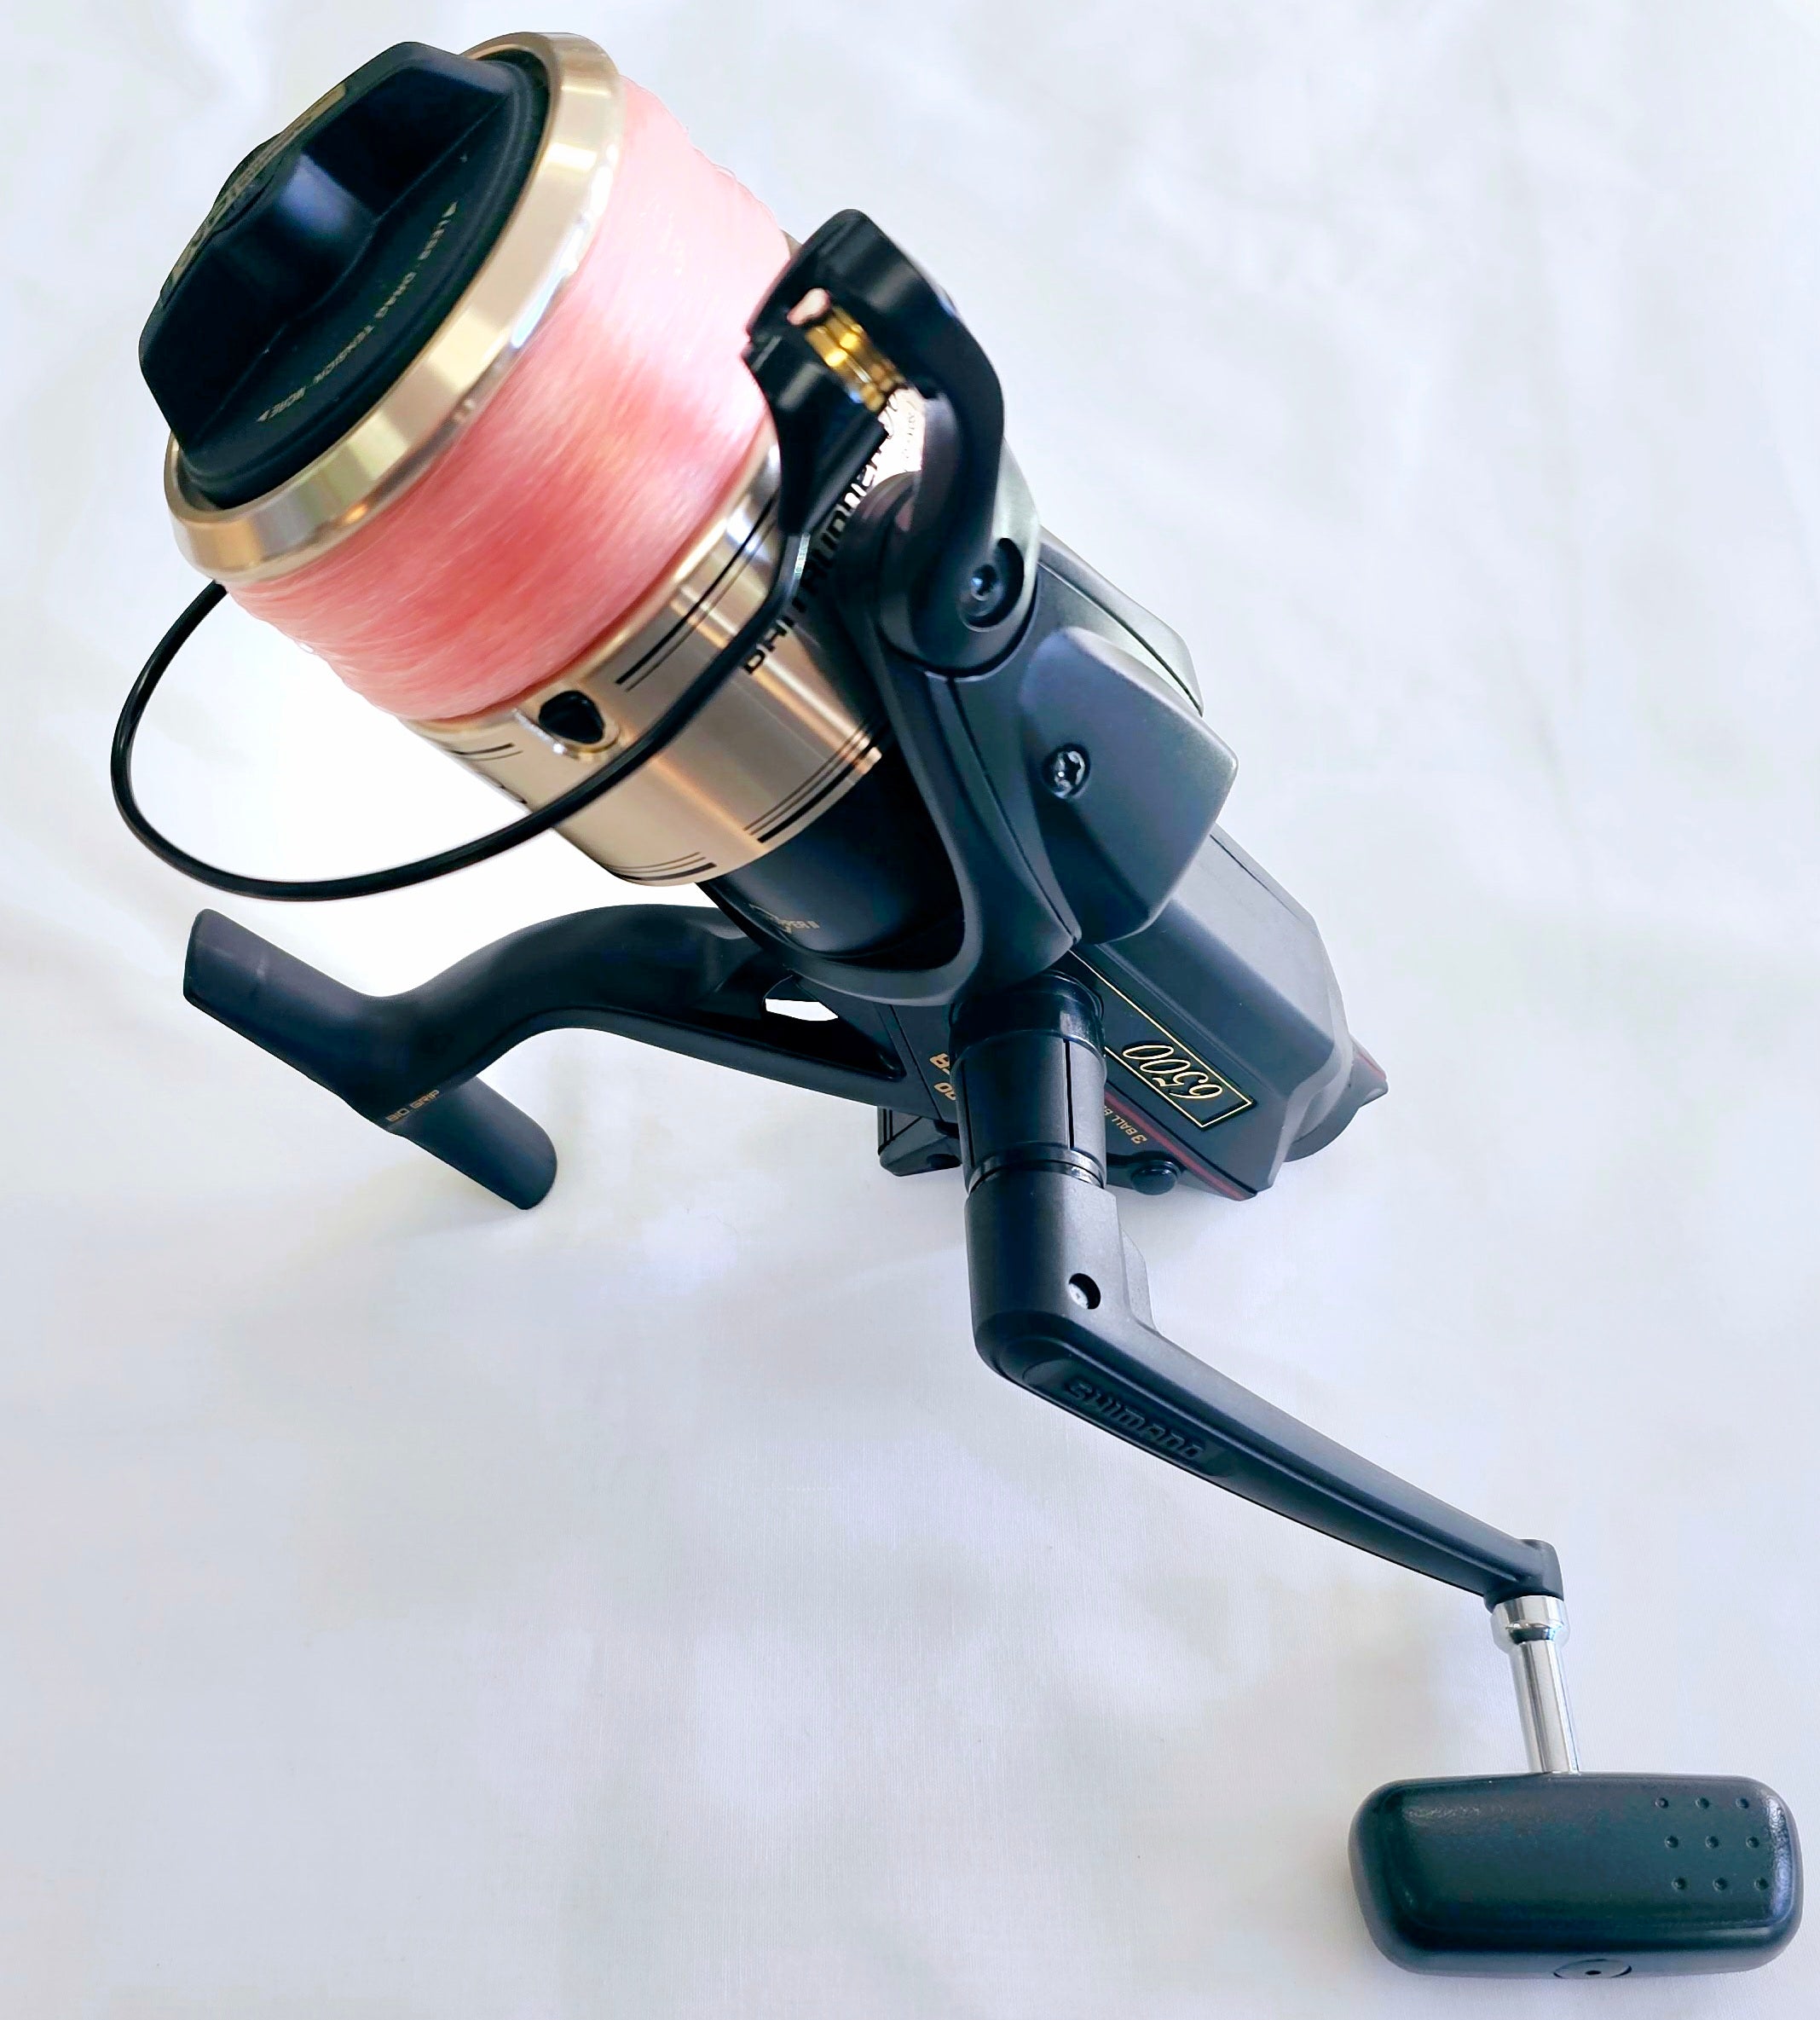 Sold at Auction: Shimano BR 6500 Baitrunner Spinning Reel